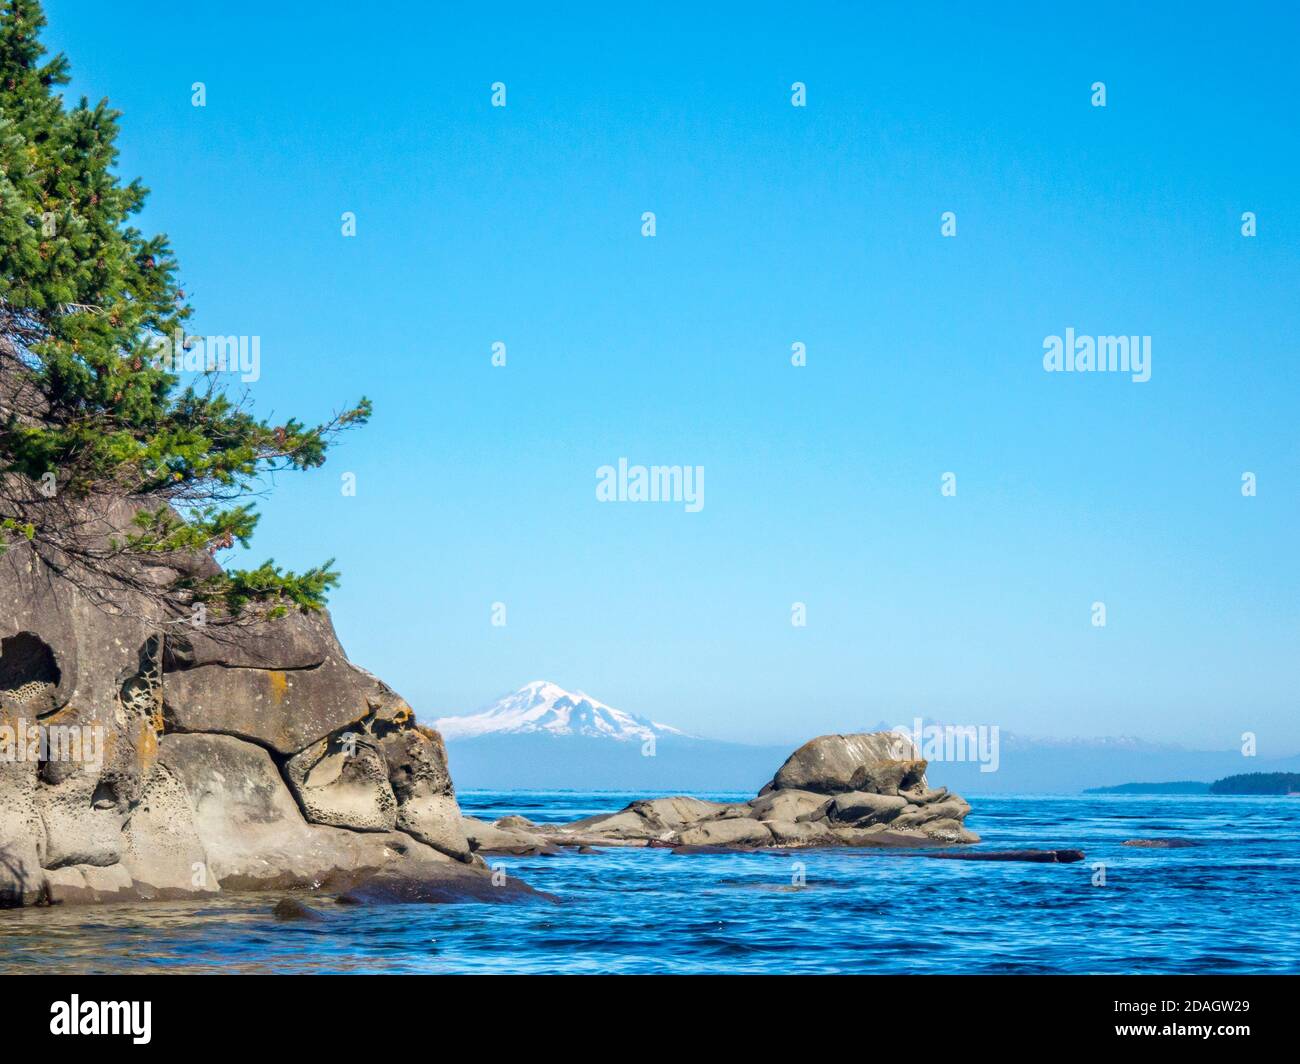 A reef extends out from an eroded island shoreline in the Strait of Georgia, framing a view of Mt. Baker, whose snowy peak rises in the distance. Stock Photo